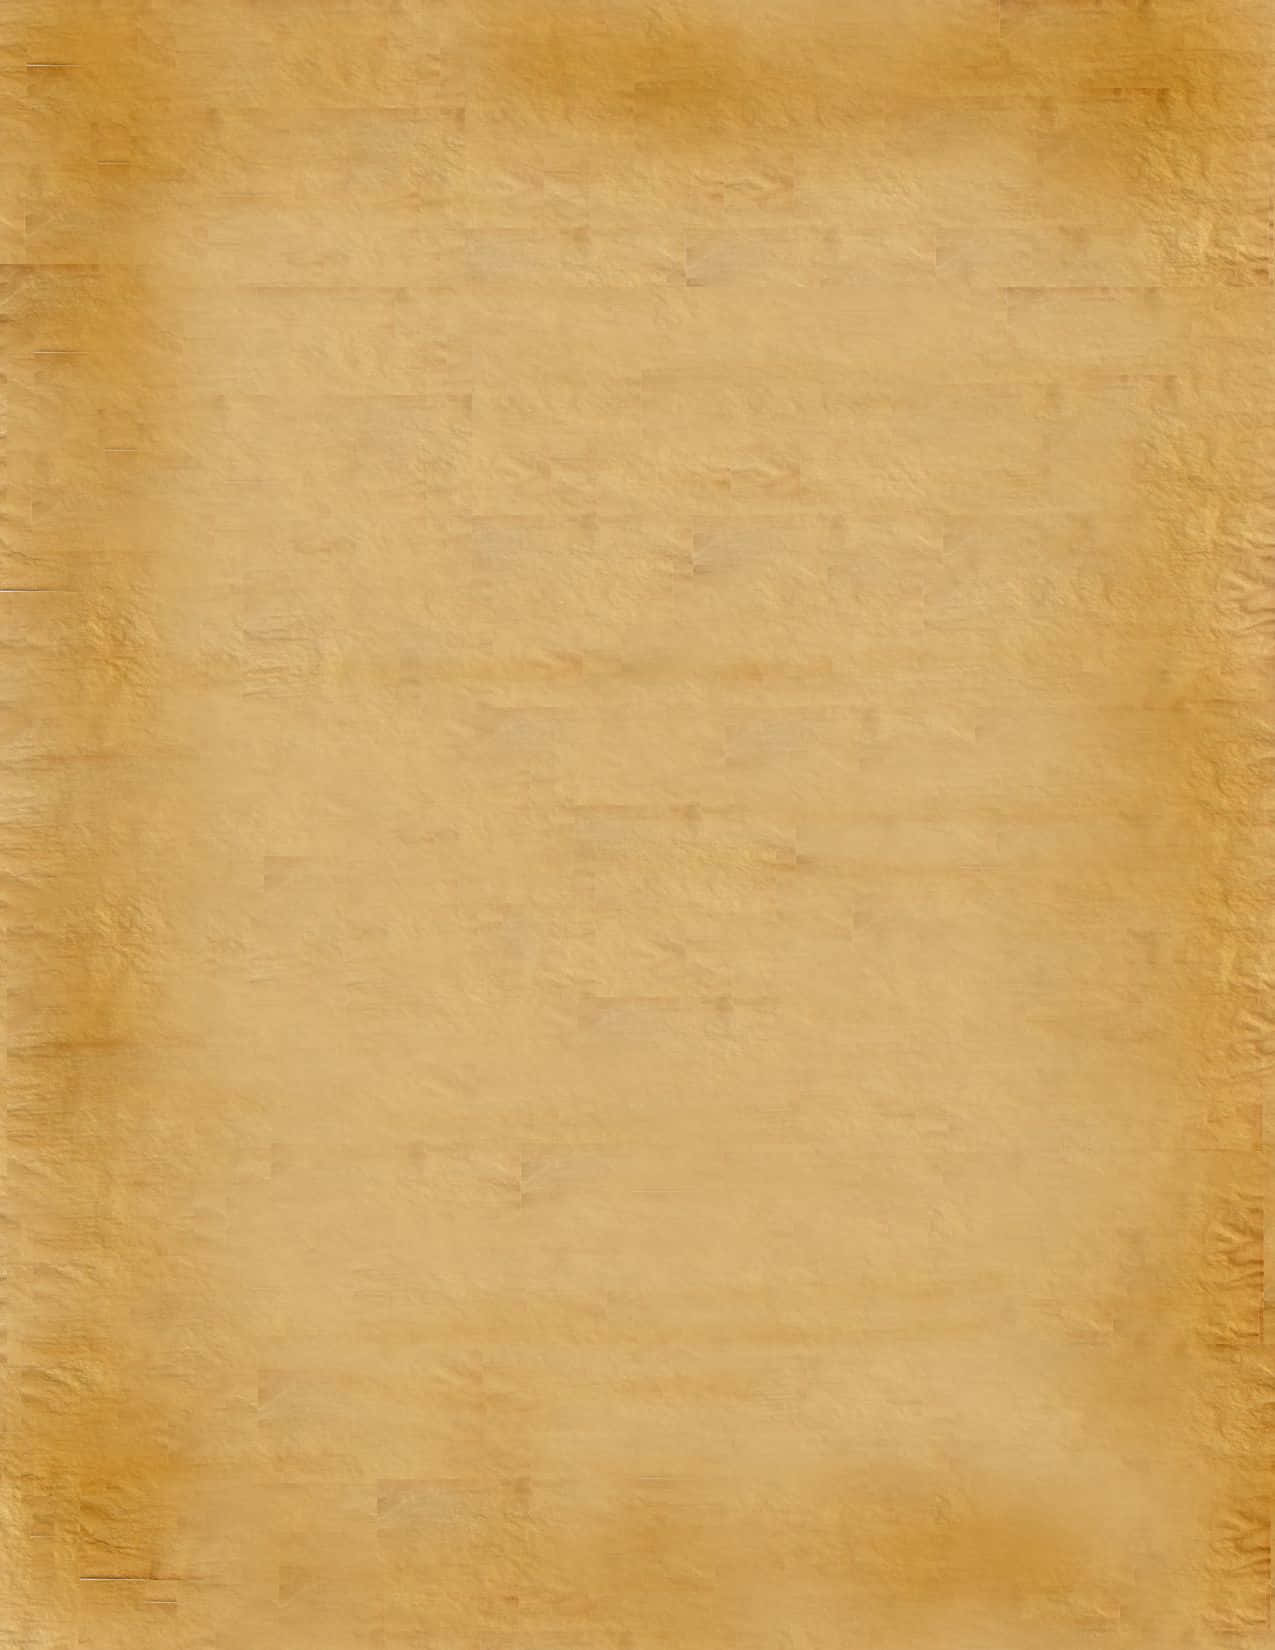 Parchment Paper Background Cream Brown Background